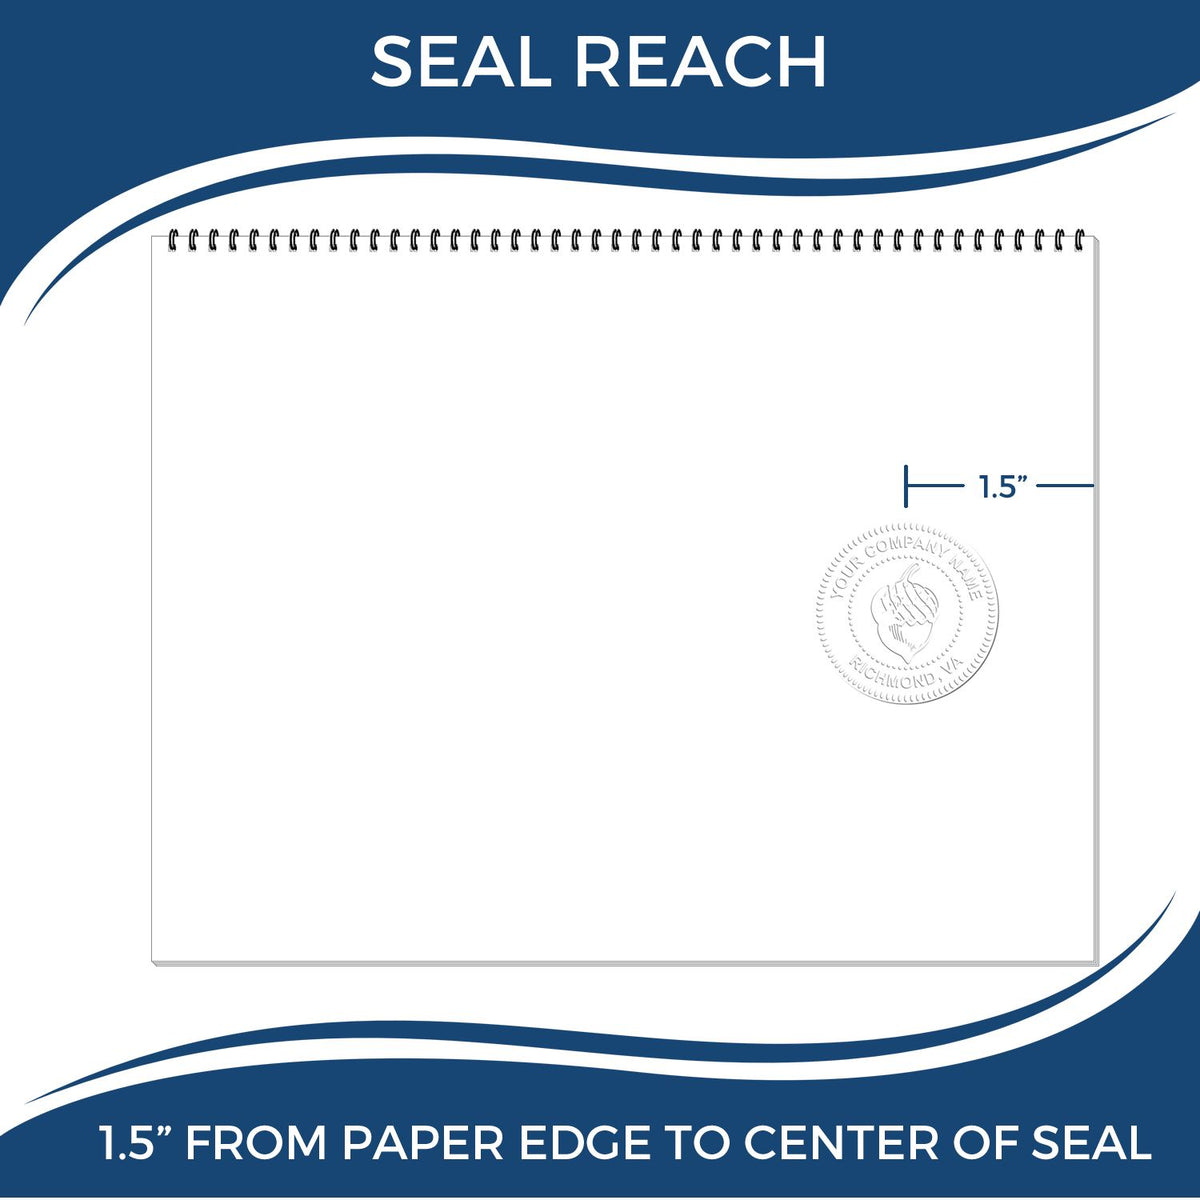 An infographic showing the seal reach which is represented by a ruler and a miniature seal image of the Georgia Geologist Desk Seal